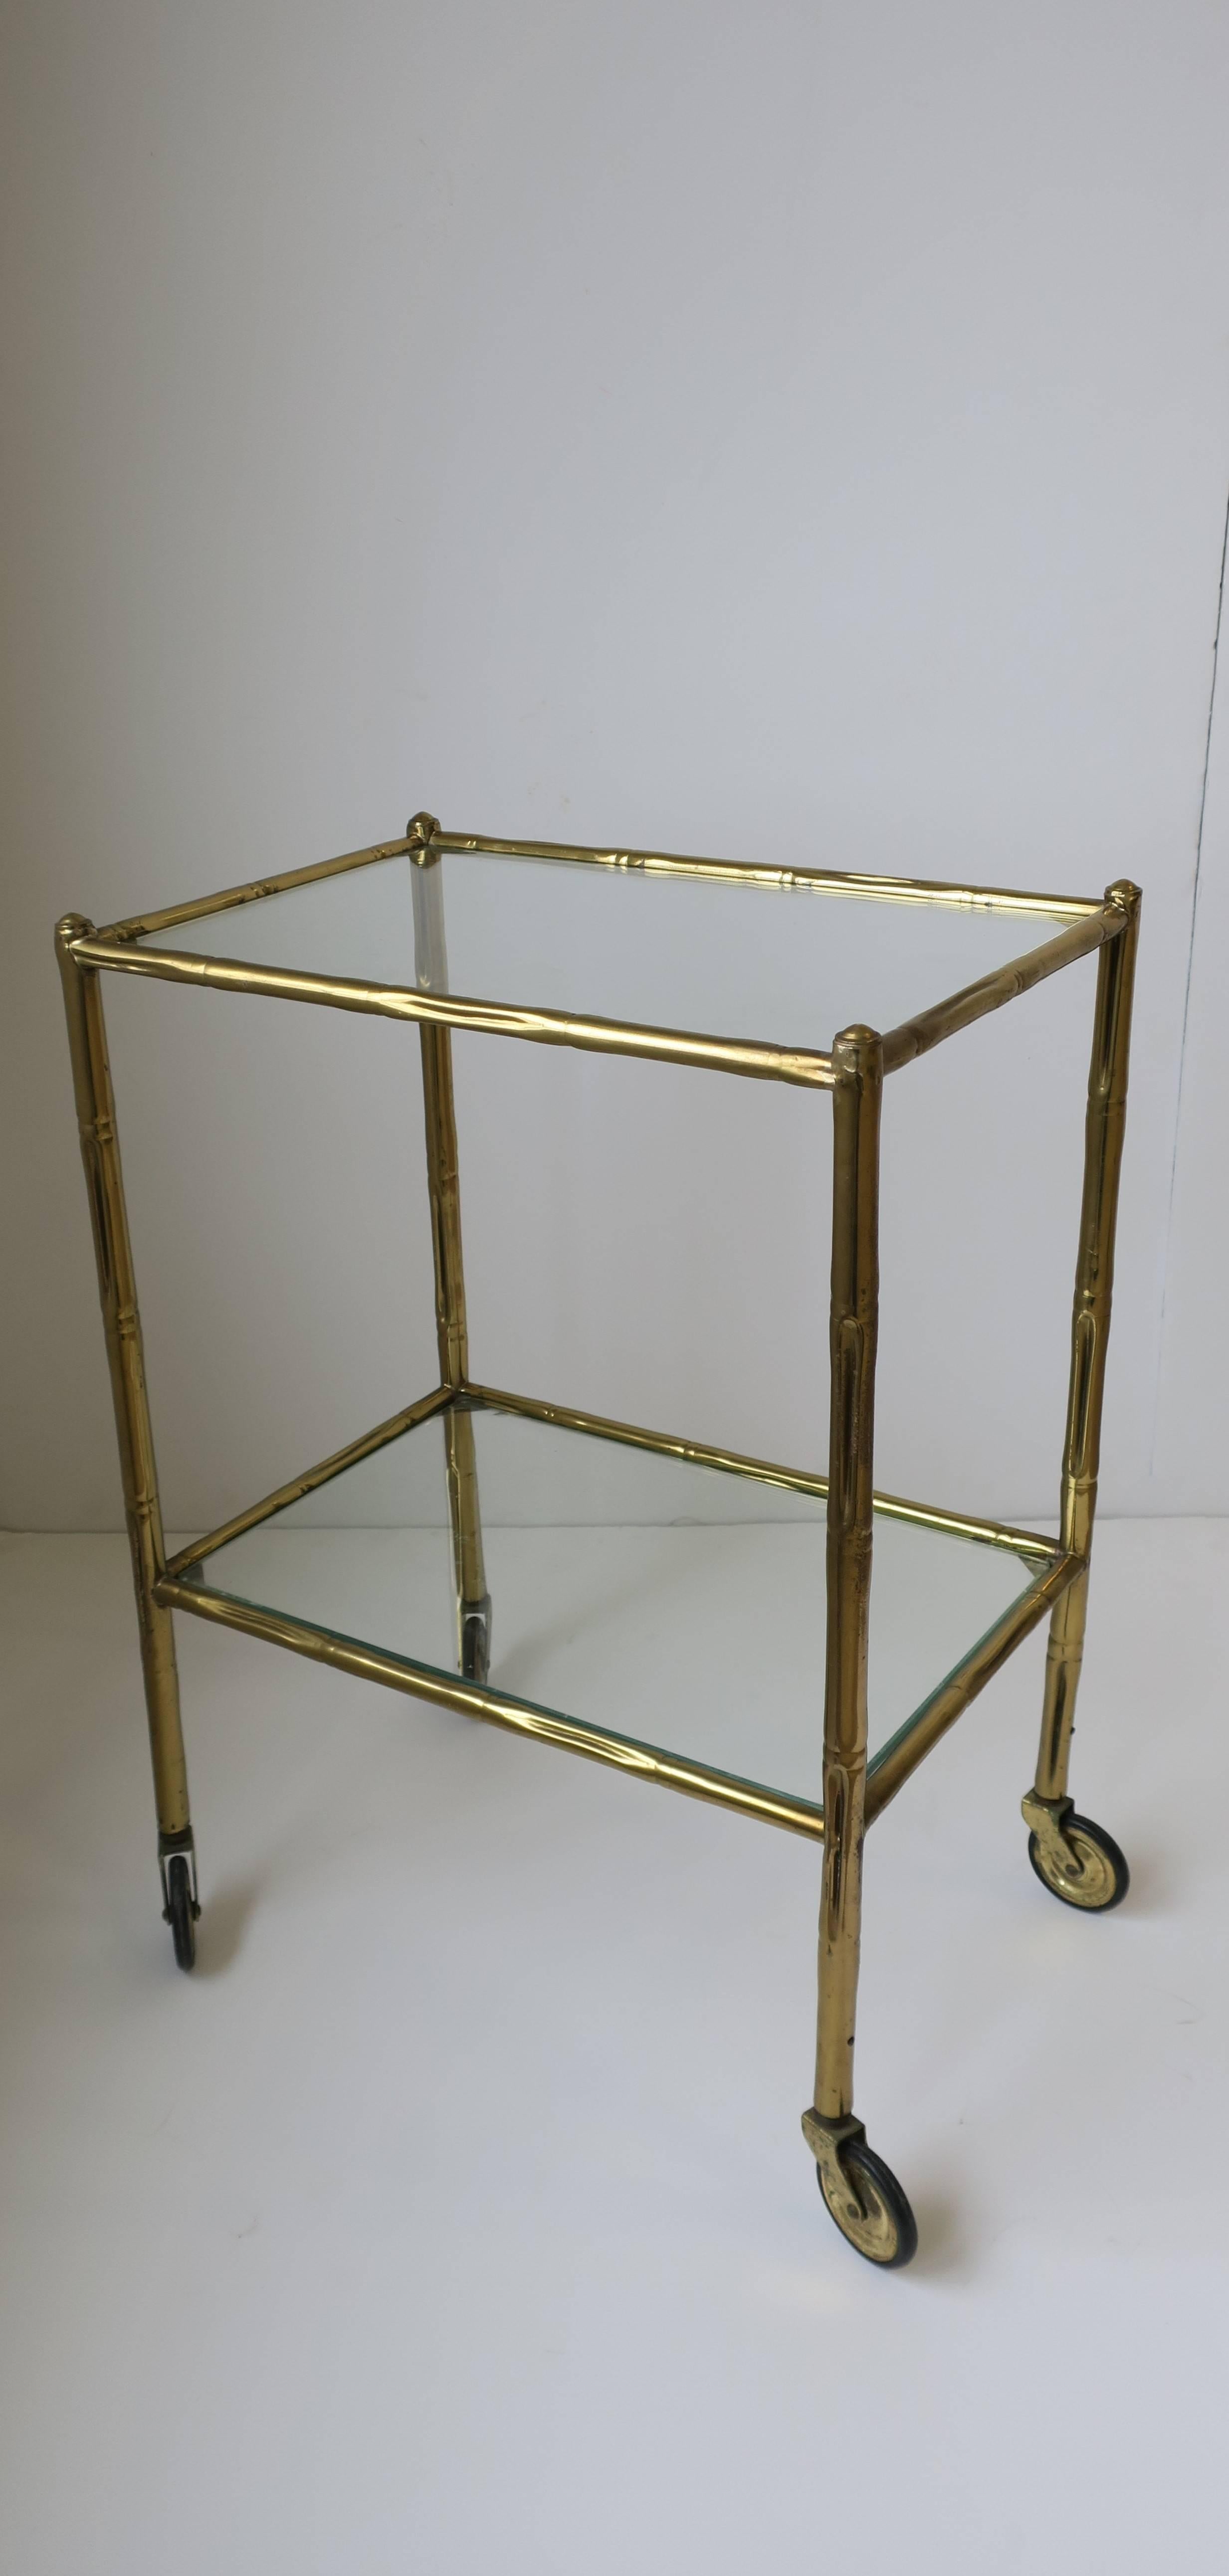 A small vintage Italian bass and glass bi-level bar cart table. Piece can also work as a side table or end table. Frame is a brass 'bamboo' design. Italy, circa early 20th Century. Measurements: 21 in. H x 15 3/8 in. W. x 10.50 in D.

Item available